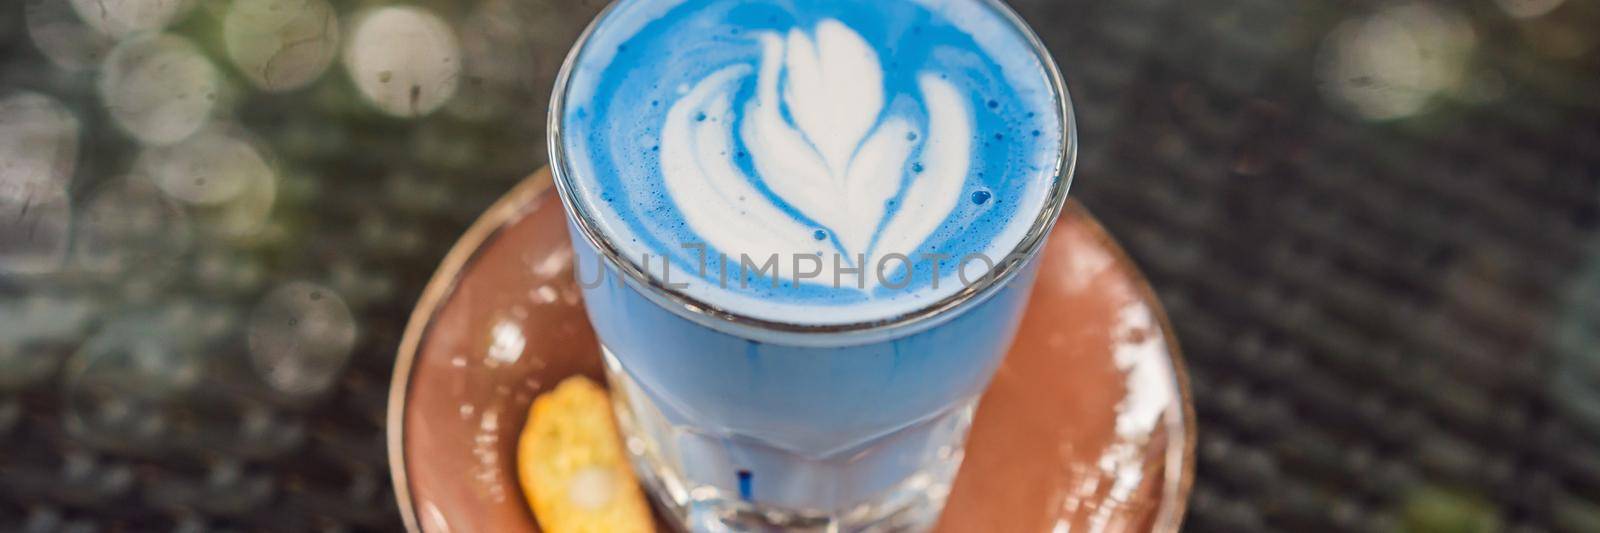 Trendy drink: Blue latte. Top view of hot butterfly pea latte or blue spirulina latte on gray textured background. Copy space for text BANNER, LONG FORMAT by galitskaya